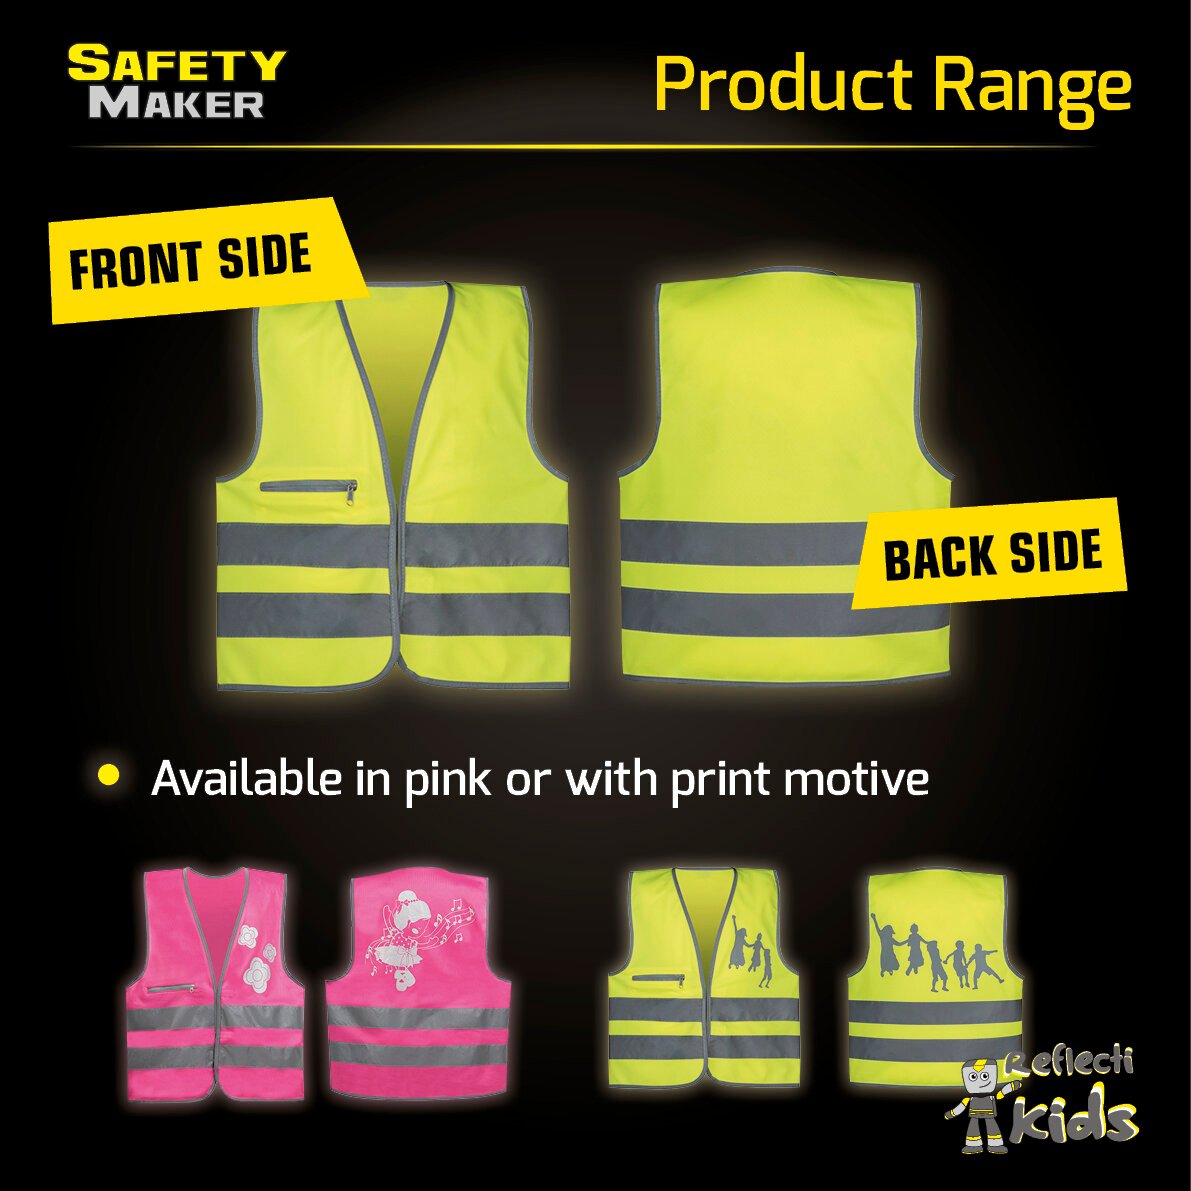 Safety vest 7-14 years yellow